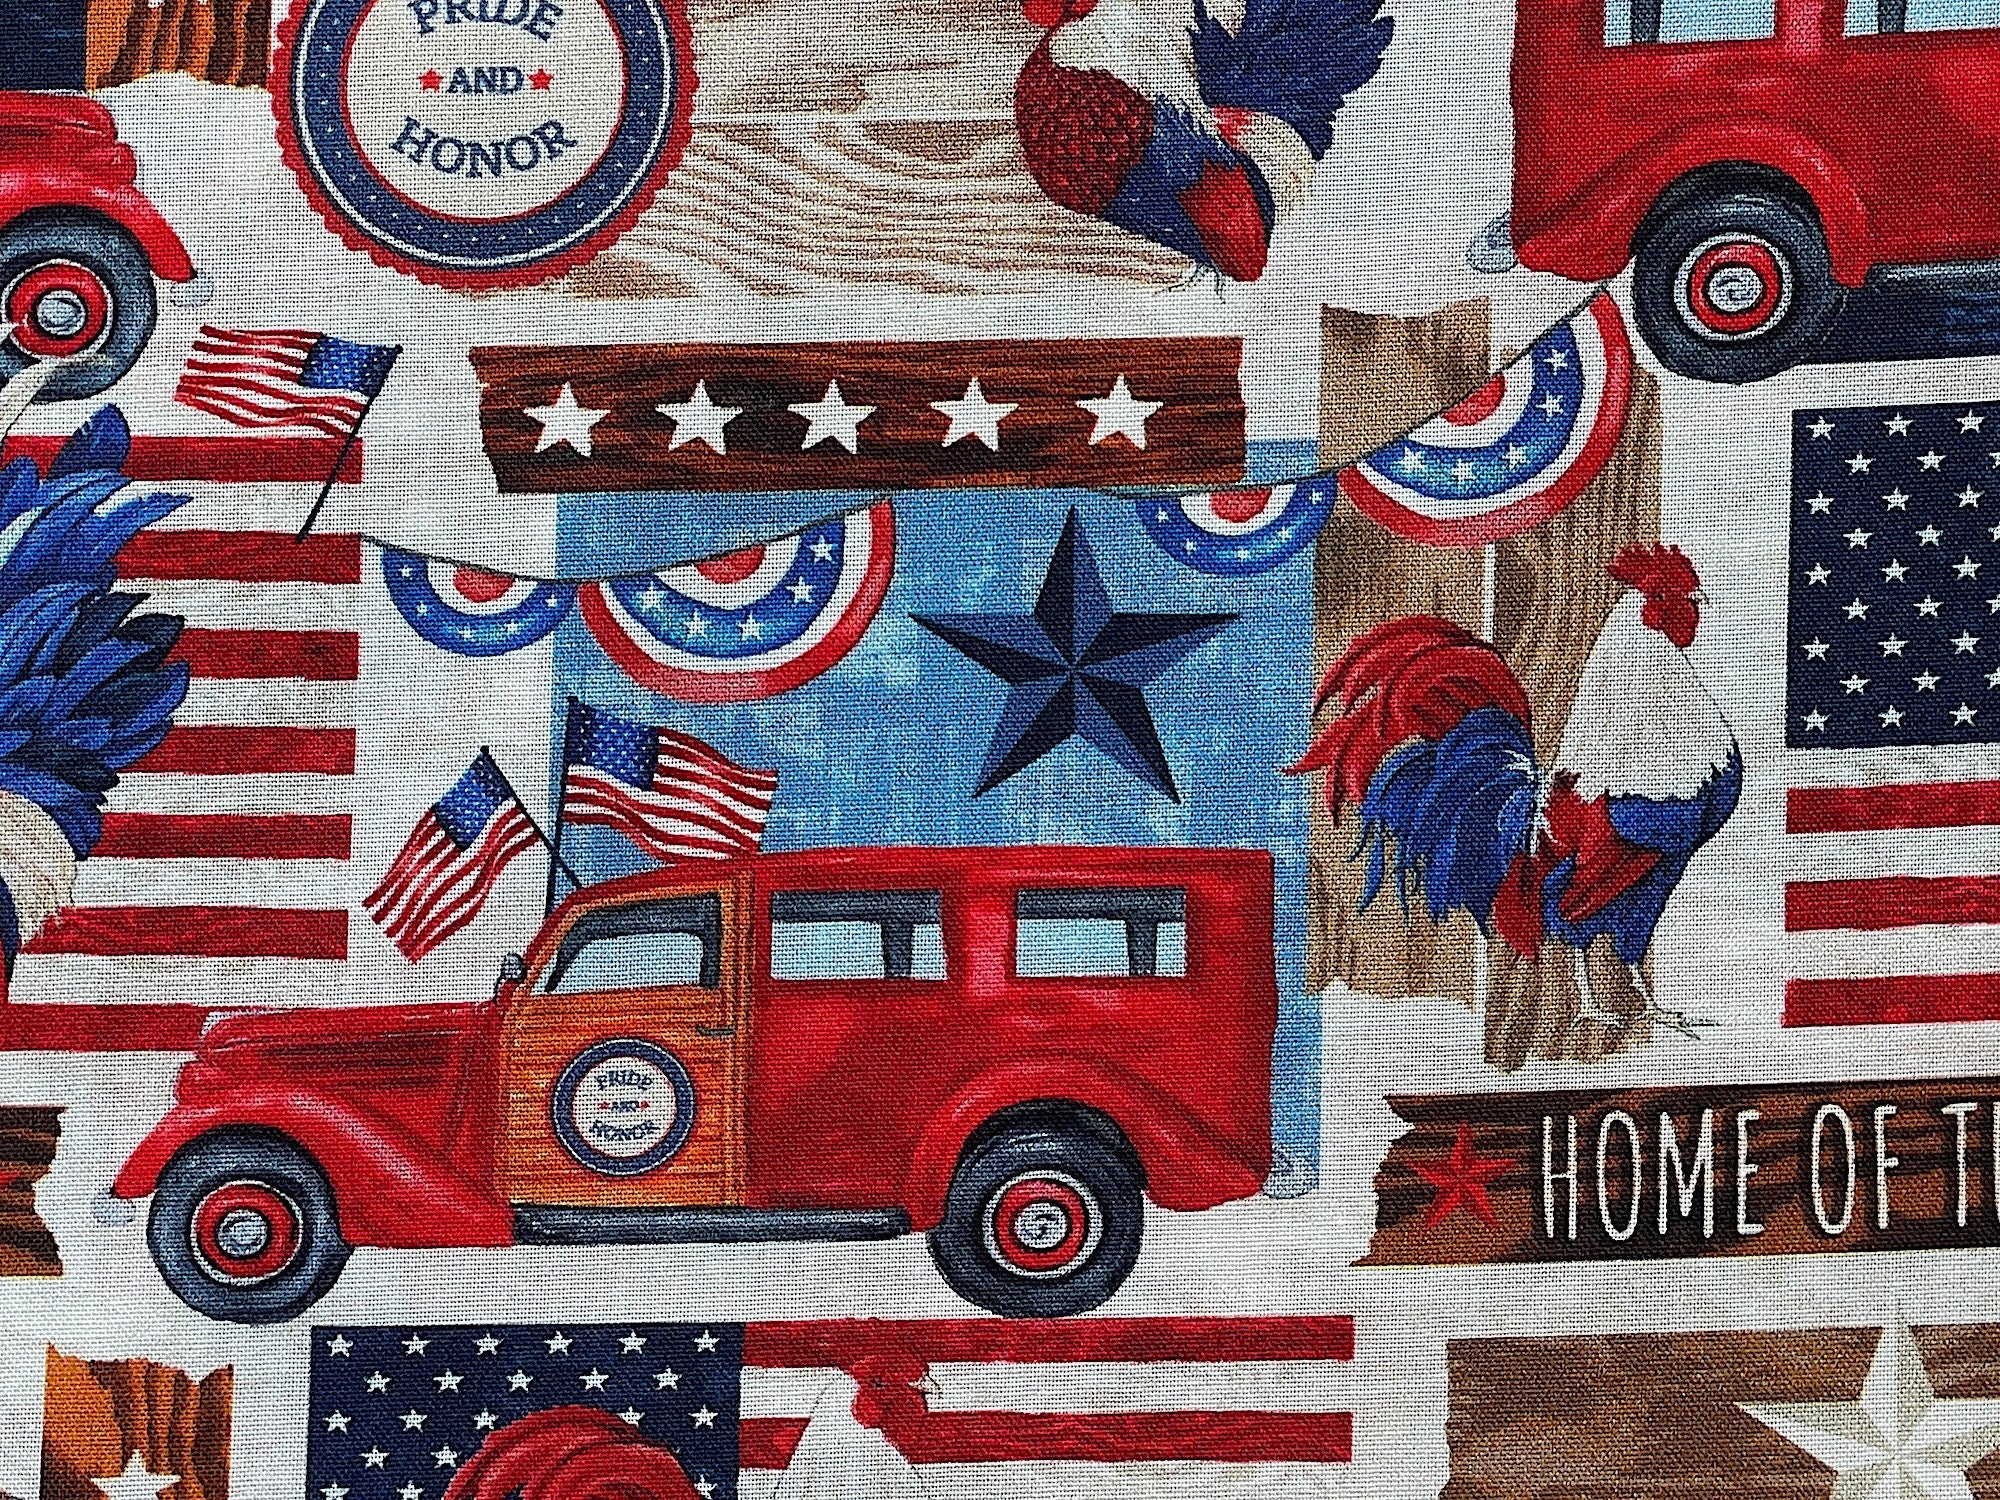 Close up of a red truck, pride and honor sign, red, white and blue rooster and more.